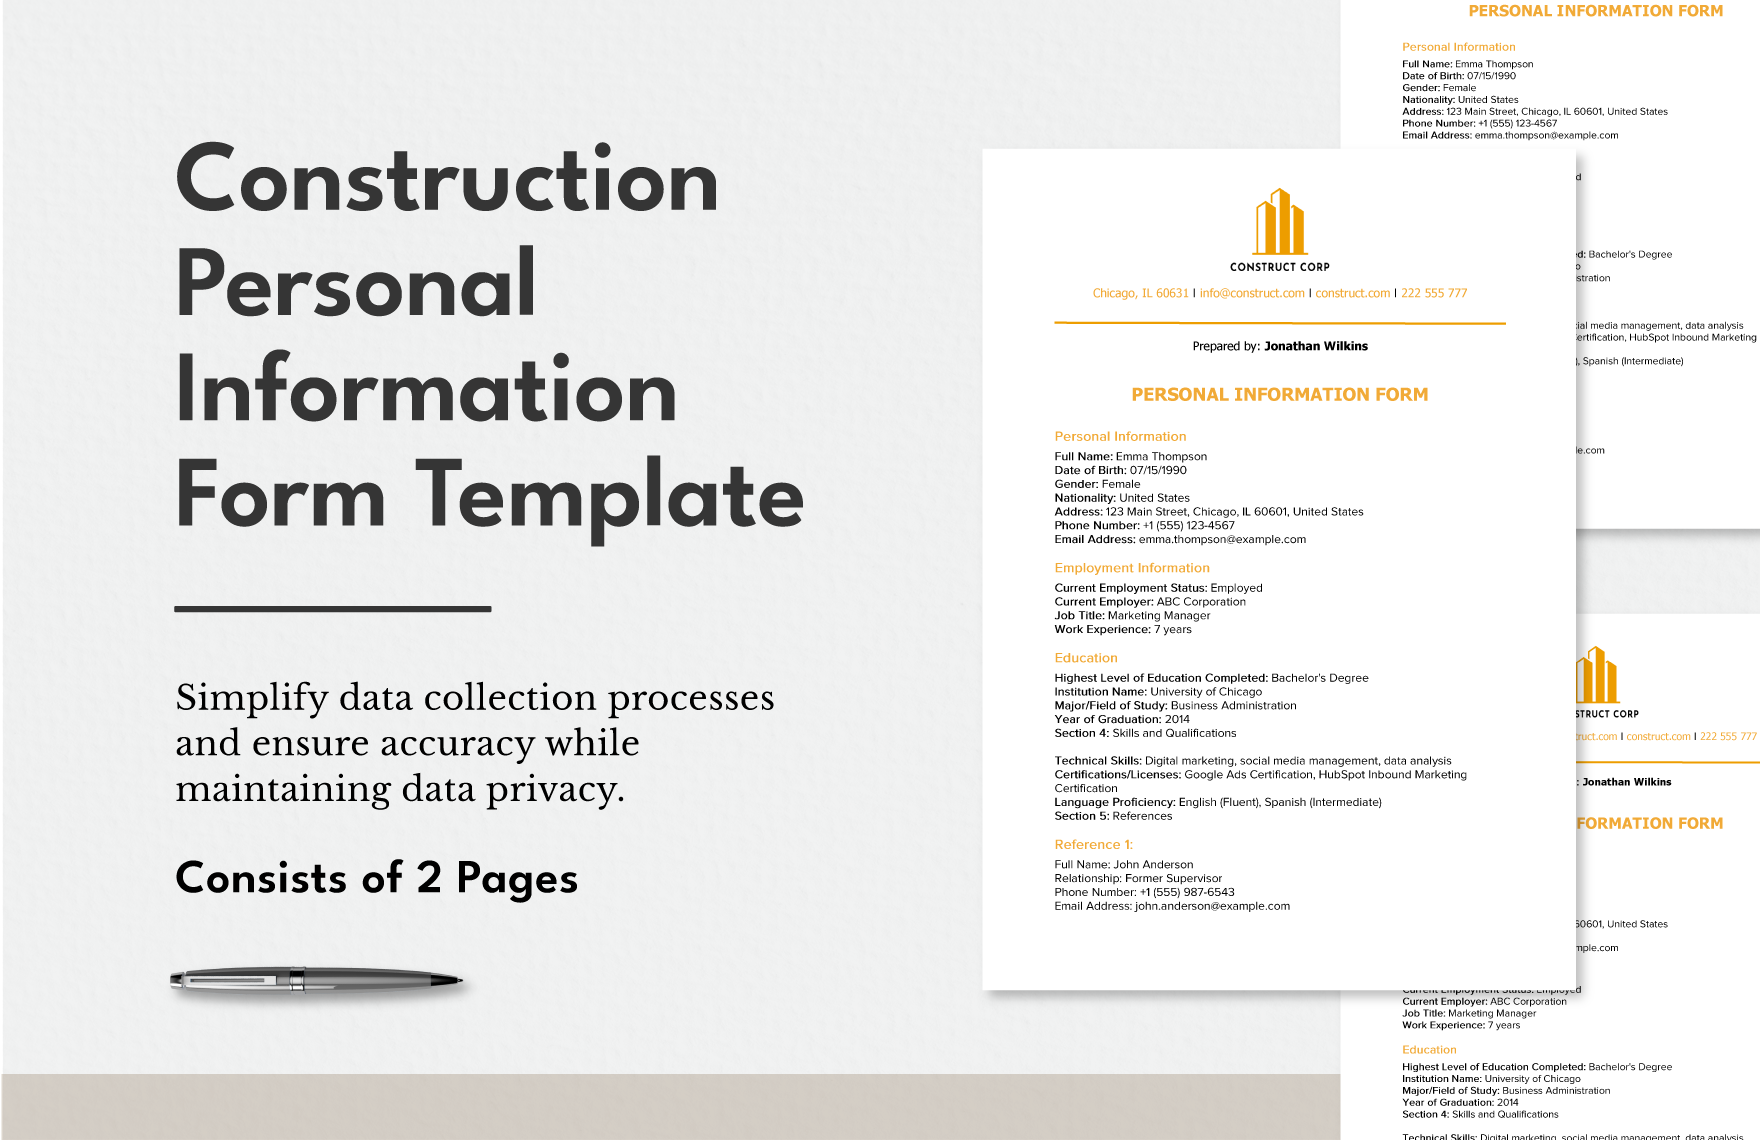 Construction Personal Information Form Template